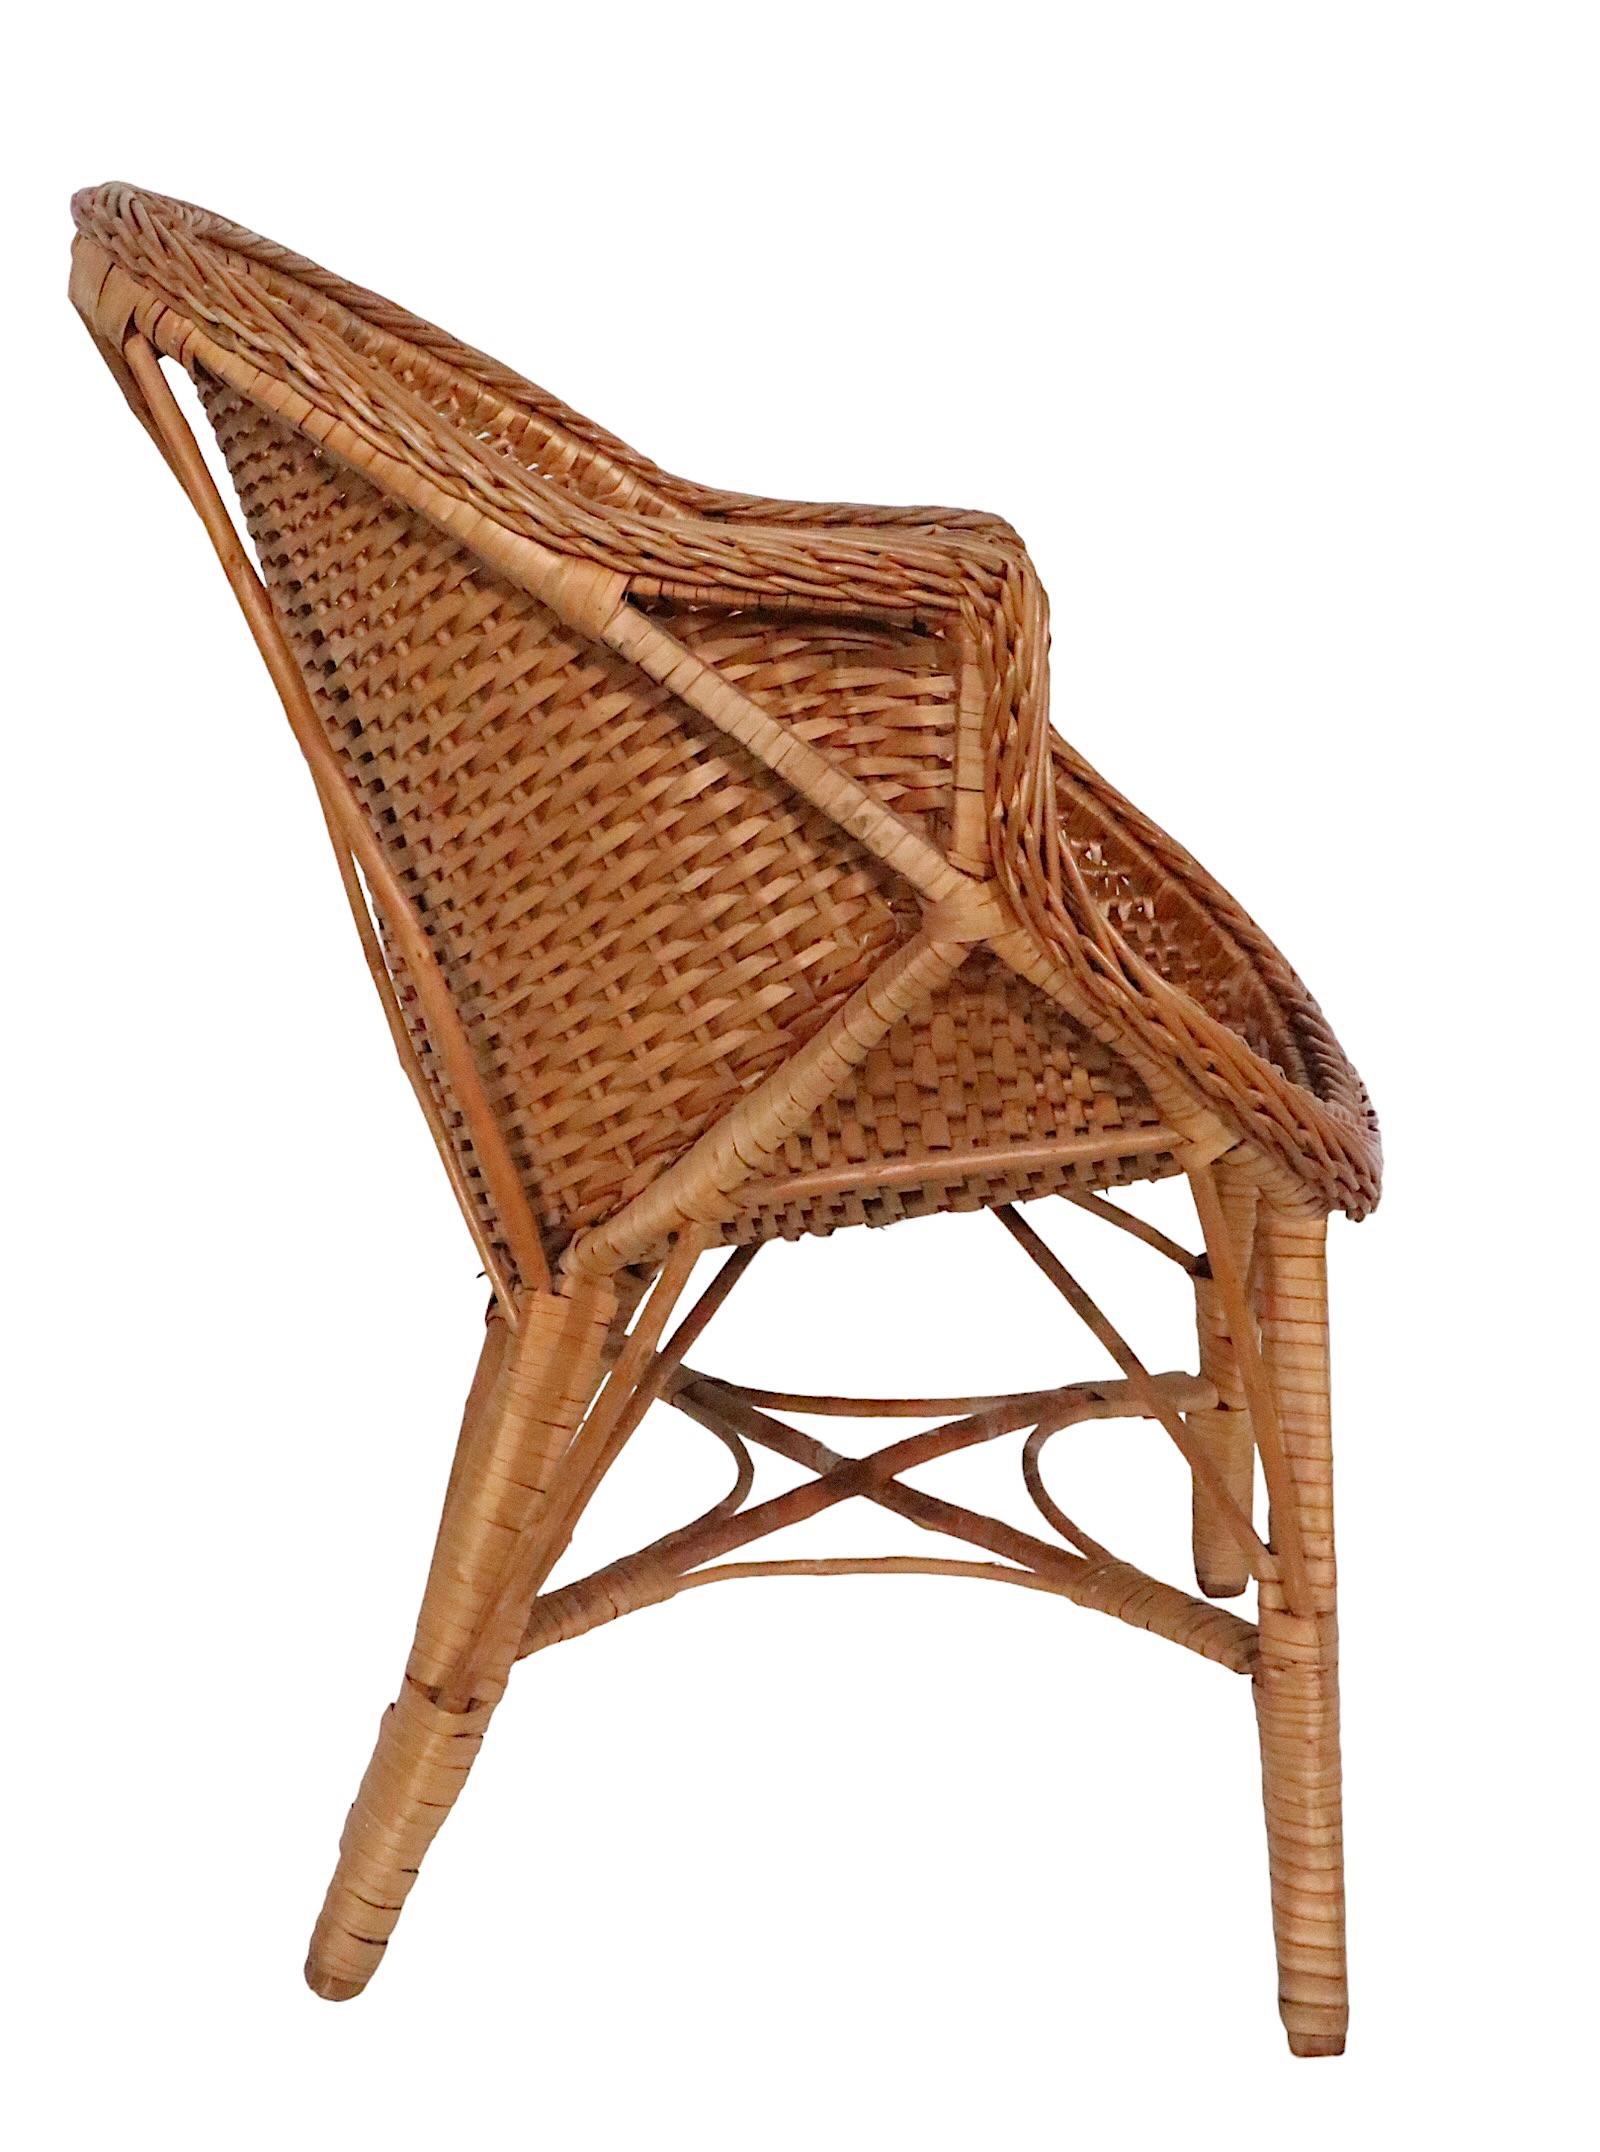 Pr  Mid Century Woven Wicker Arm Chairs  For Sale 4